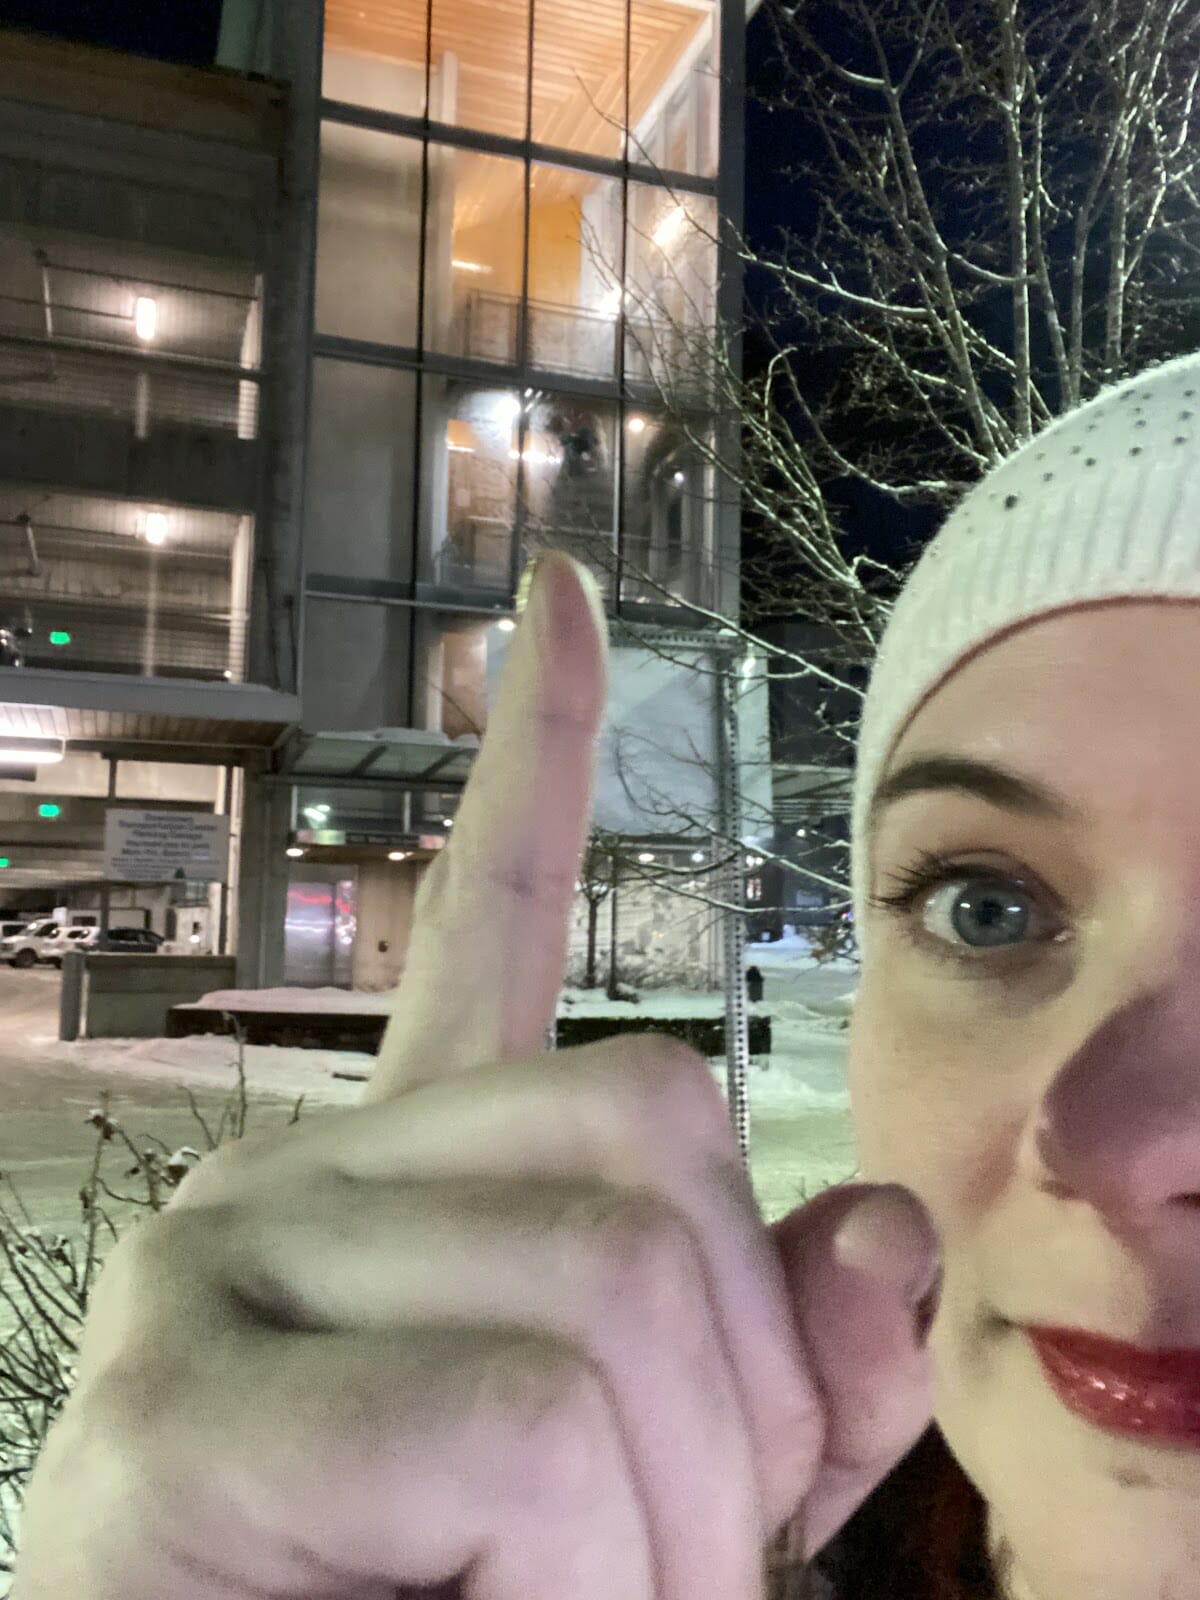 Candy Cane Hunt selfie of woman pounting up at the candy cane in the window at the parking garage.